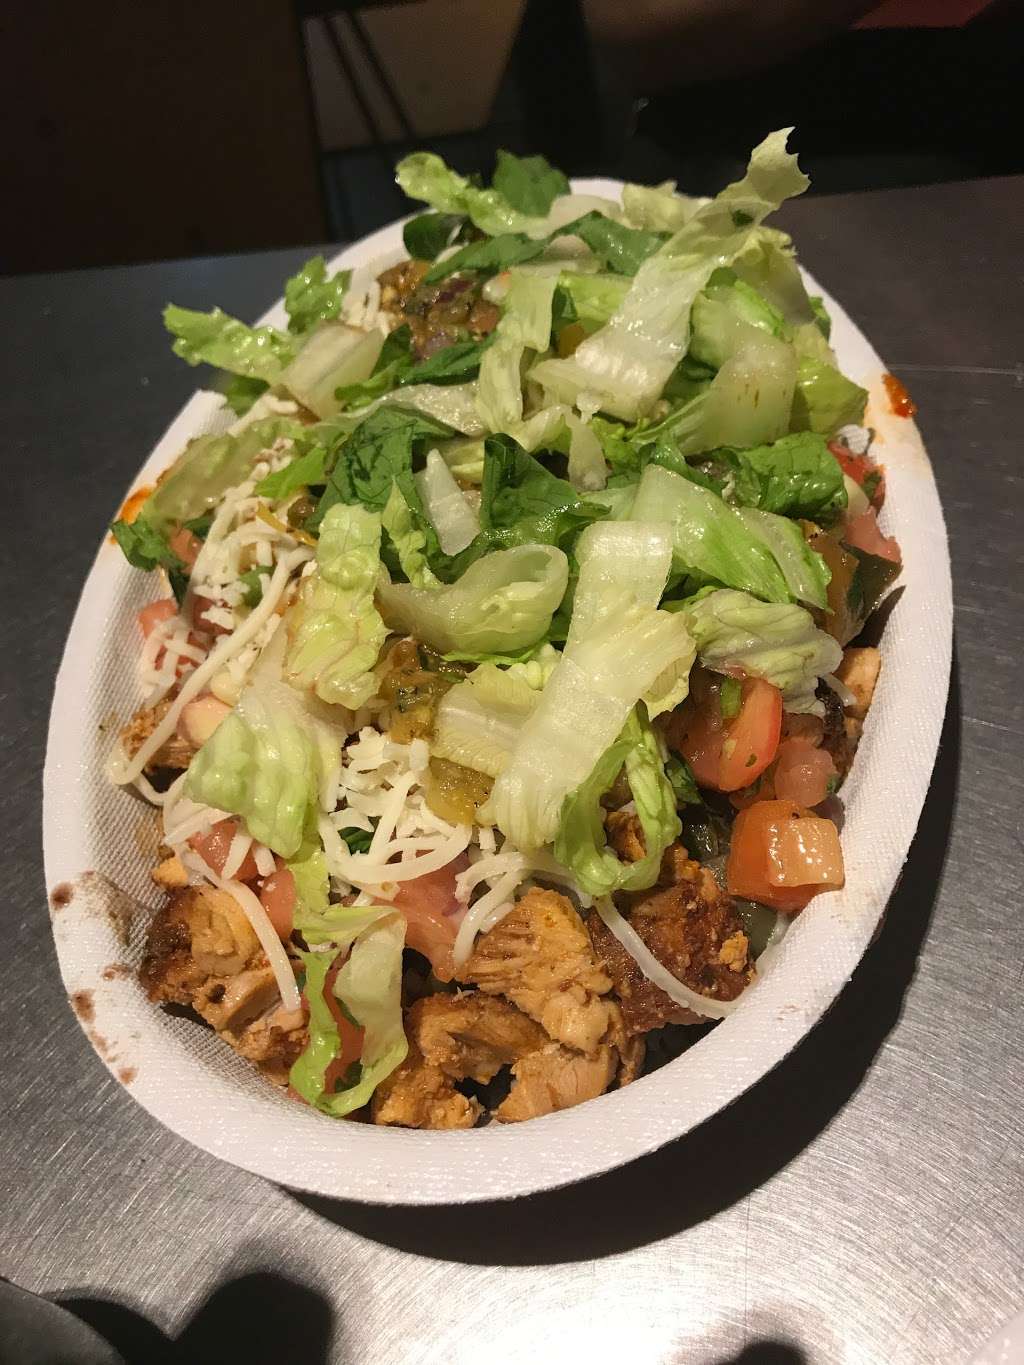 Chipotle Mexican Grill | 12 Lawrence St, Dobbs Ferry, NY 10522 | Phone: (914) 693-8135